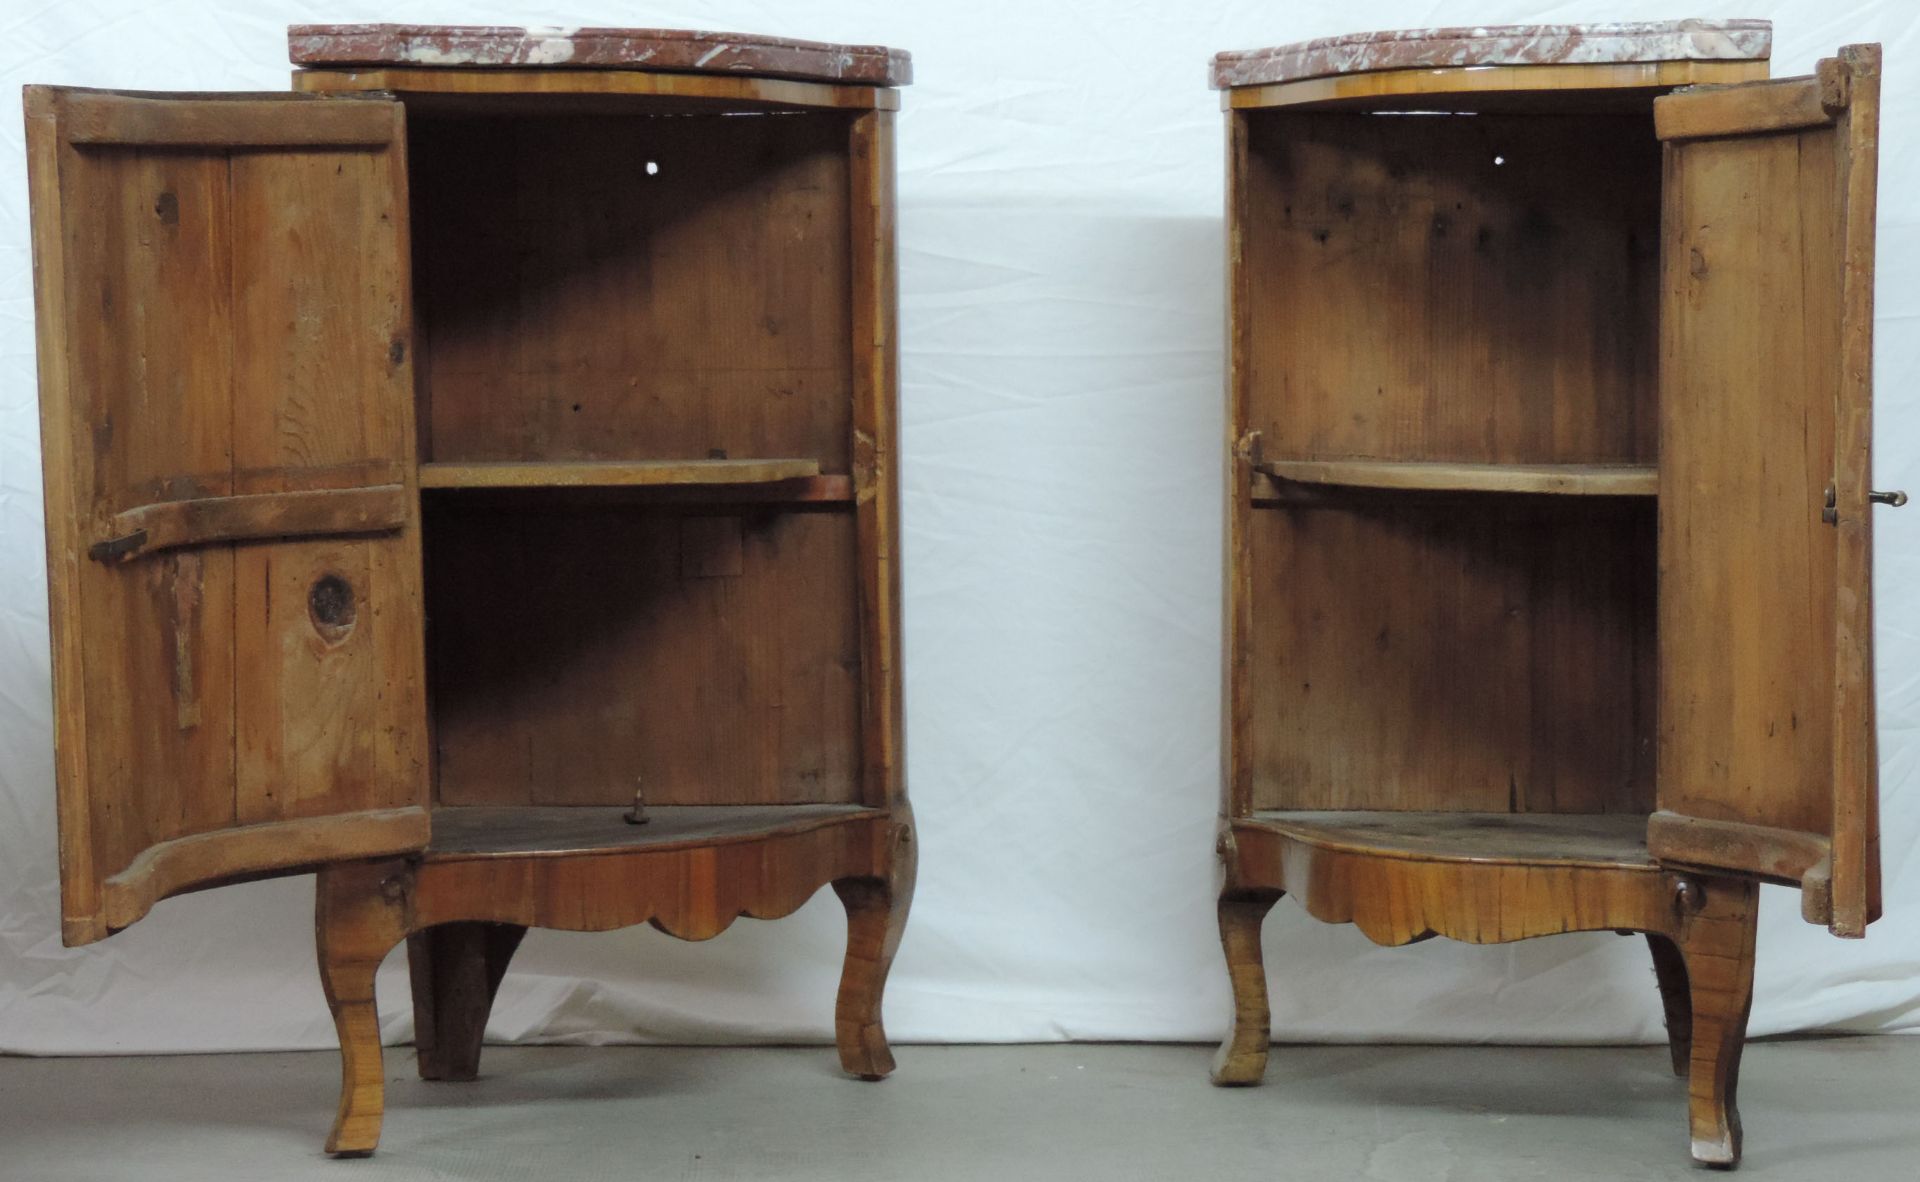 2 corner cabinets. Around 1800. Probably France. Ebonized. Marble tops.Each 81 cm high. Thigh length - Image 2 of 7